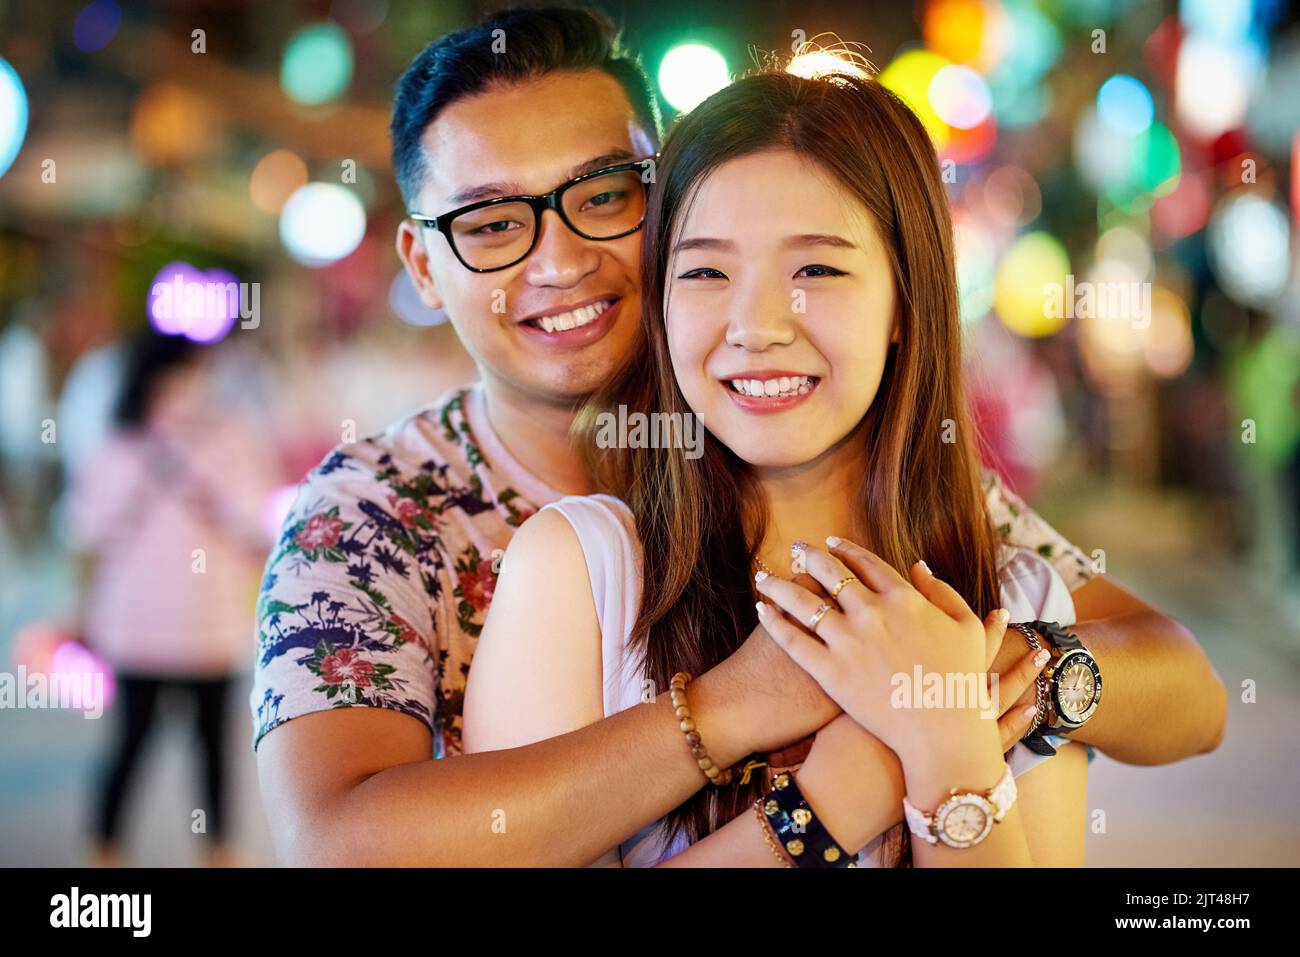 Theyre the cutest couple. a happy young couple spending the night out in the city. Stock Photo